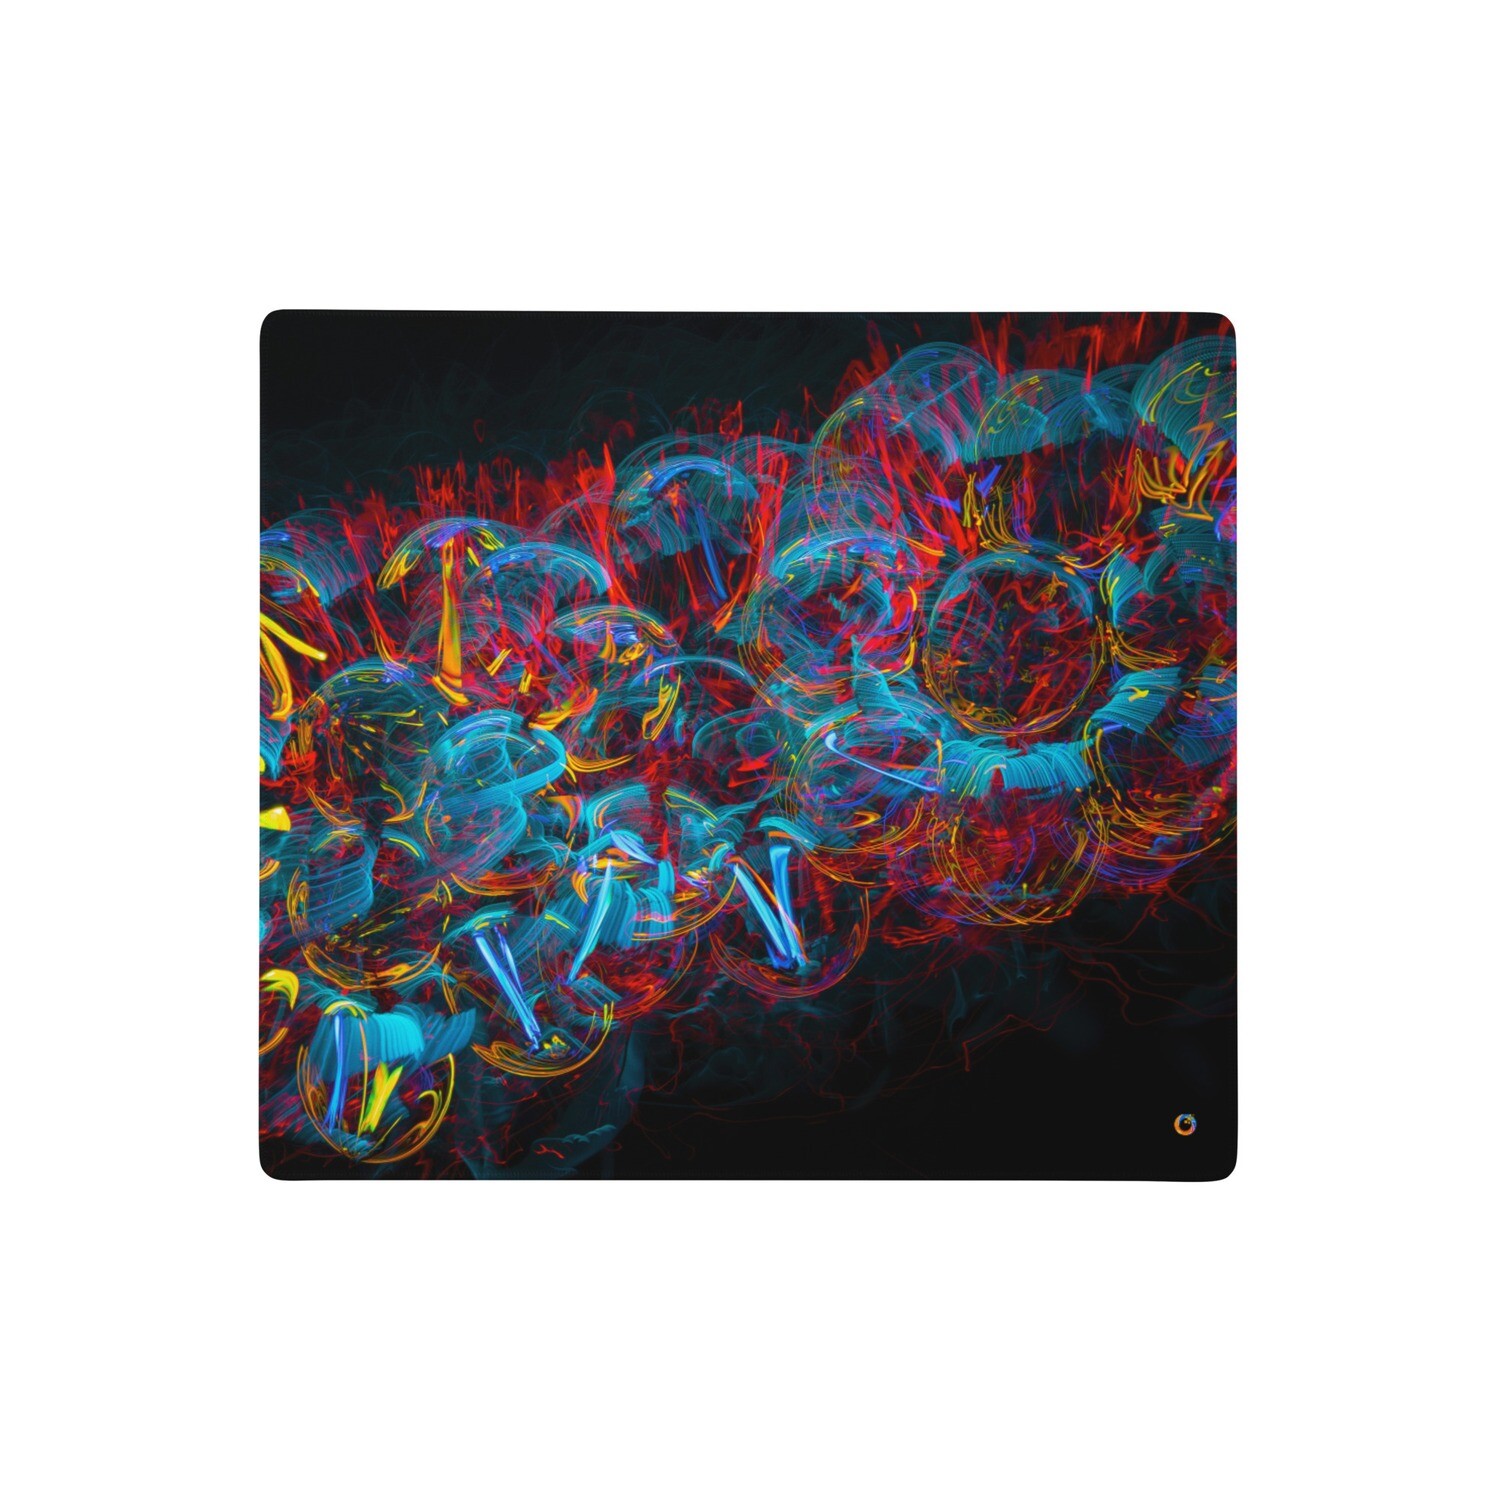 Gaming mouse pad #83